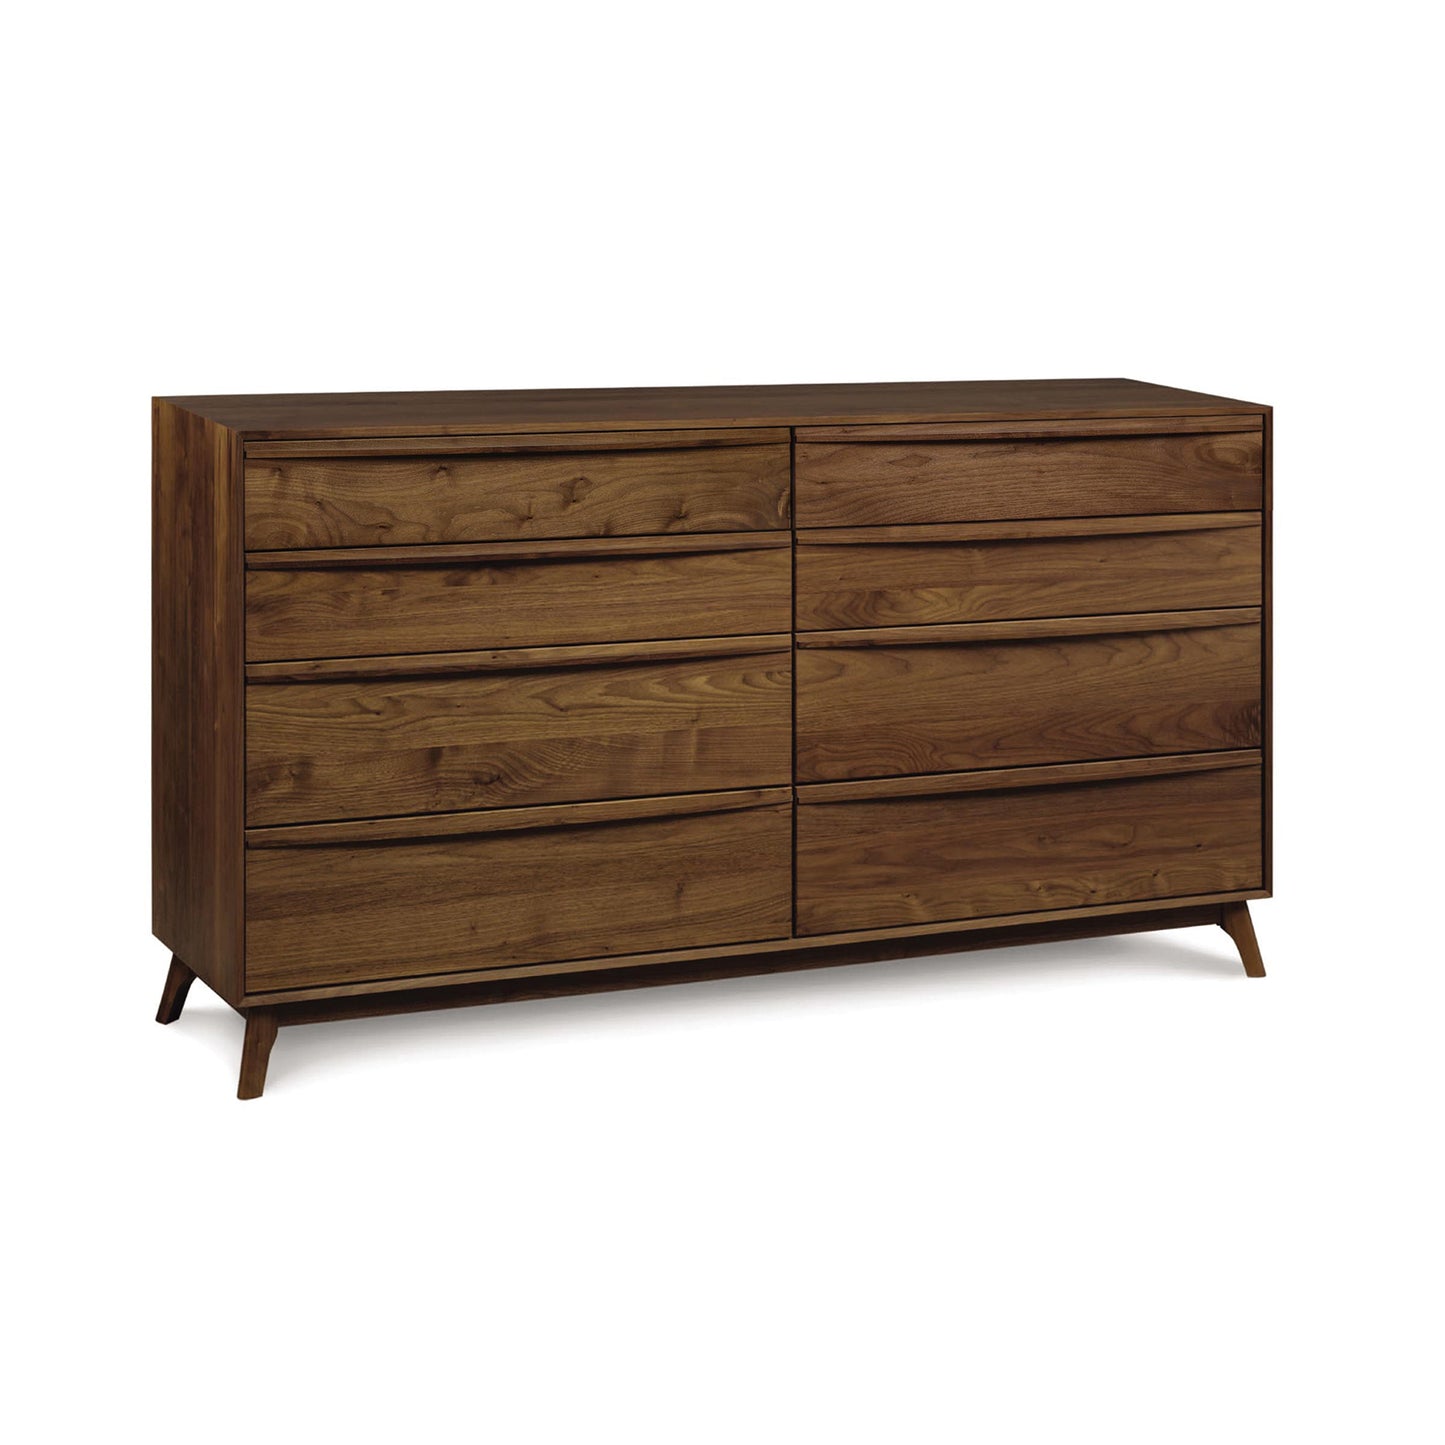 A wooden eight-drawer dresser from the Copeland Furniture Catalina collection with a mid-century modern design on an isolated background.